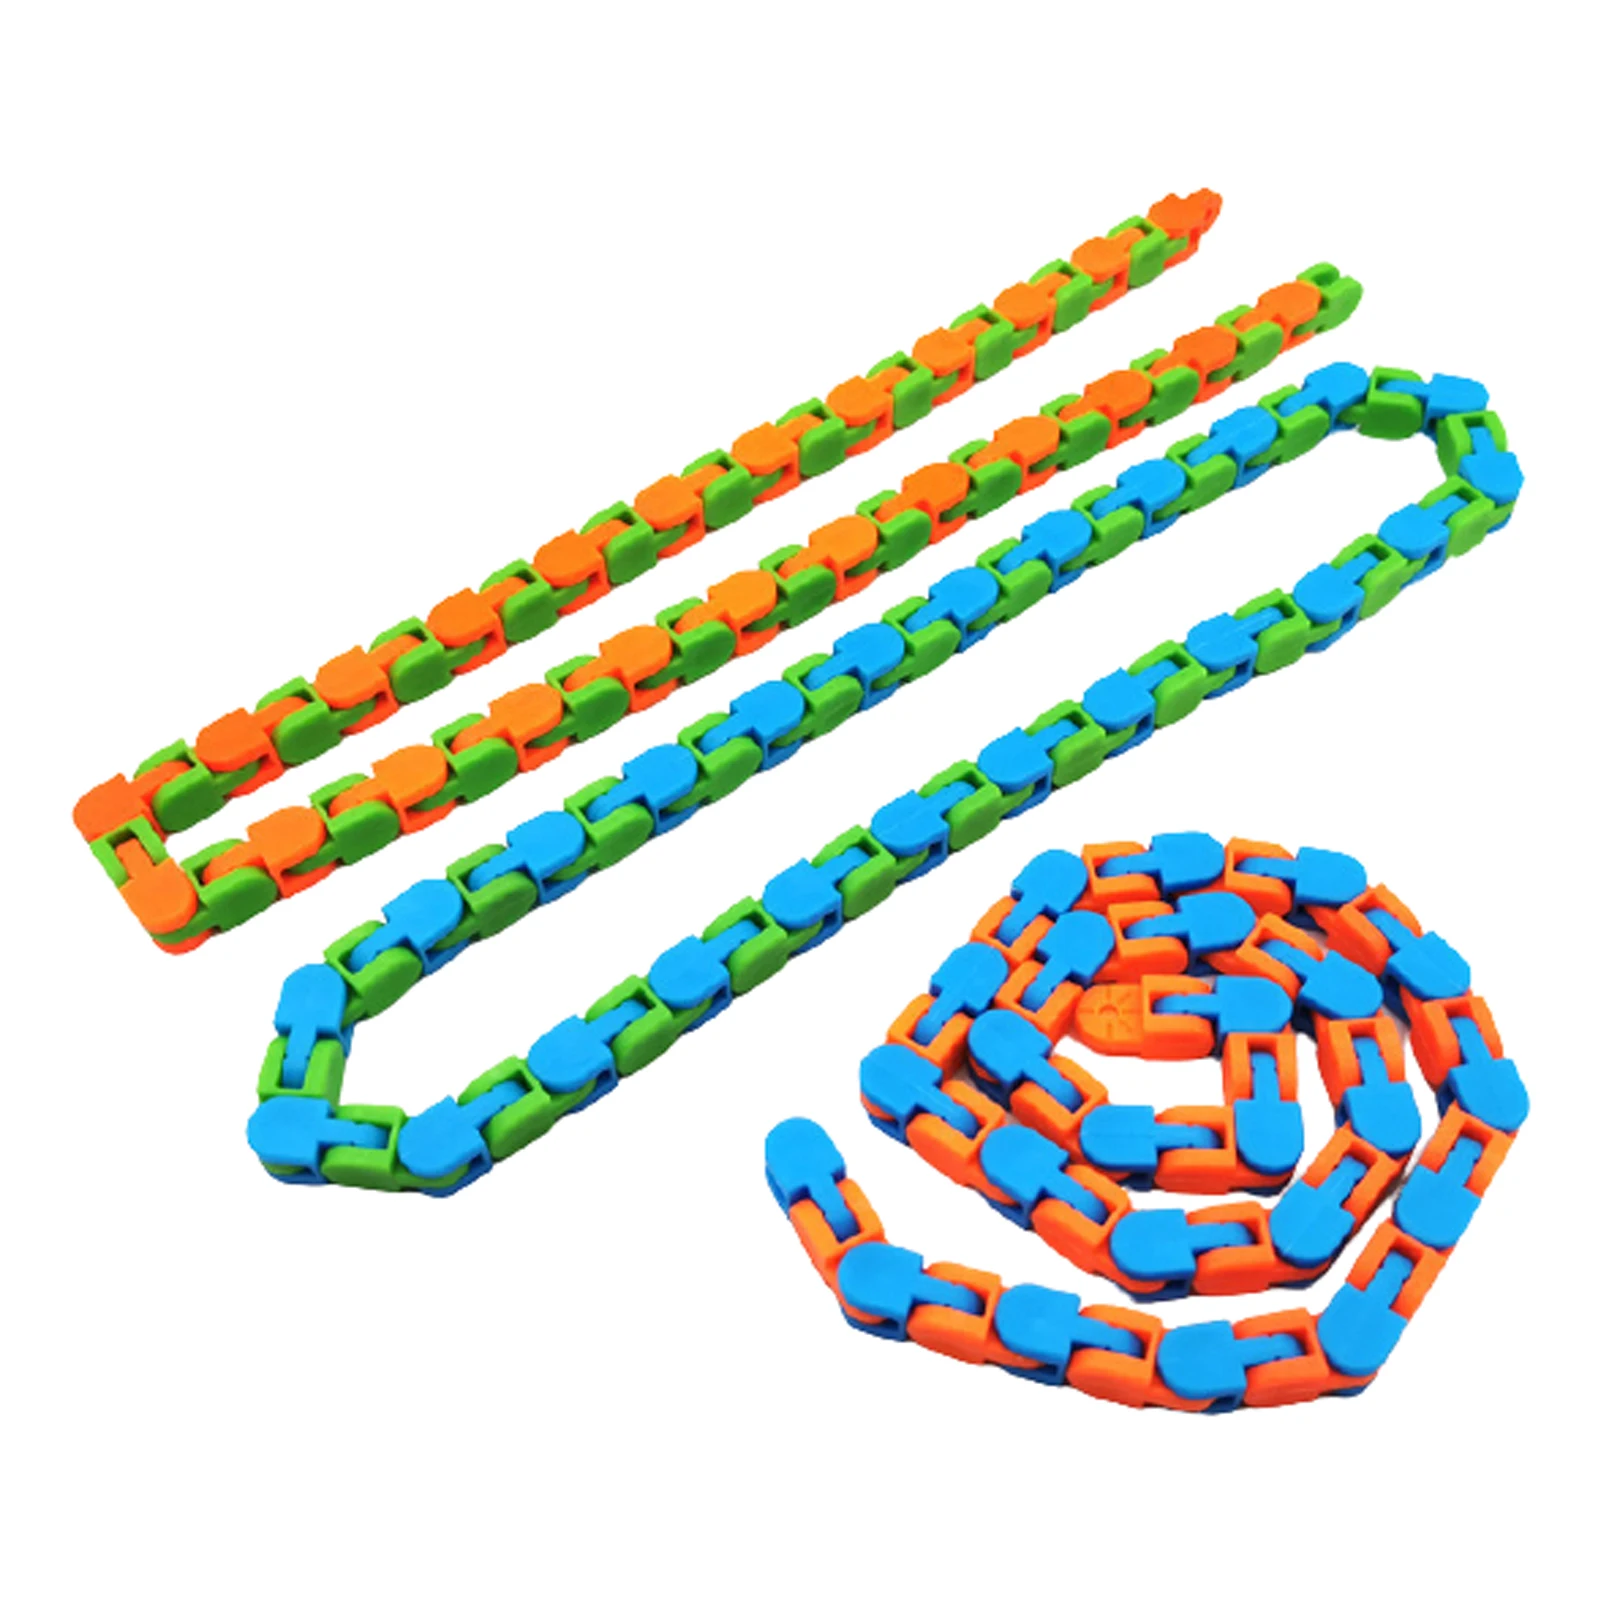 

3pcs/pack Toy Chain Anxiety Finger Sensory Stress Relief Kids Adults Click Party Tracks ADHD Fidget Snake Wacky